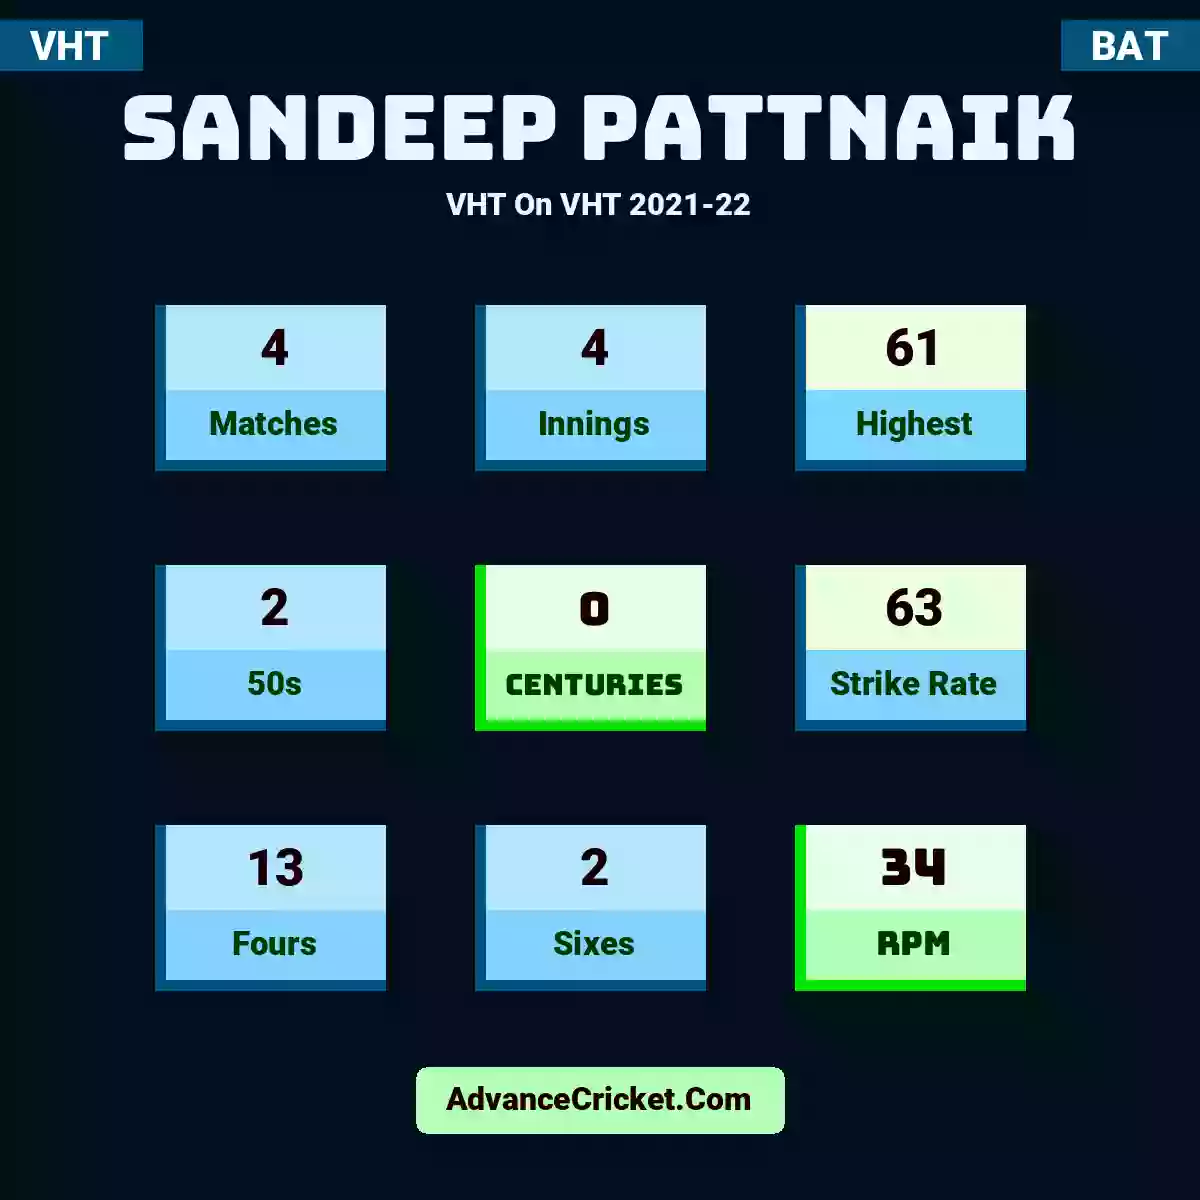 Sandeep Pattnaik VHT  On VHT 2021-22, Sandeep Pattnaik played 4 matches, scored 61 runs as highest, 2 half-centuries, and 0 centuries, with a strike rate of 63. S.Pattnaik hit 13 fours and 2 sixes, with an RPM of 34.